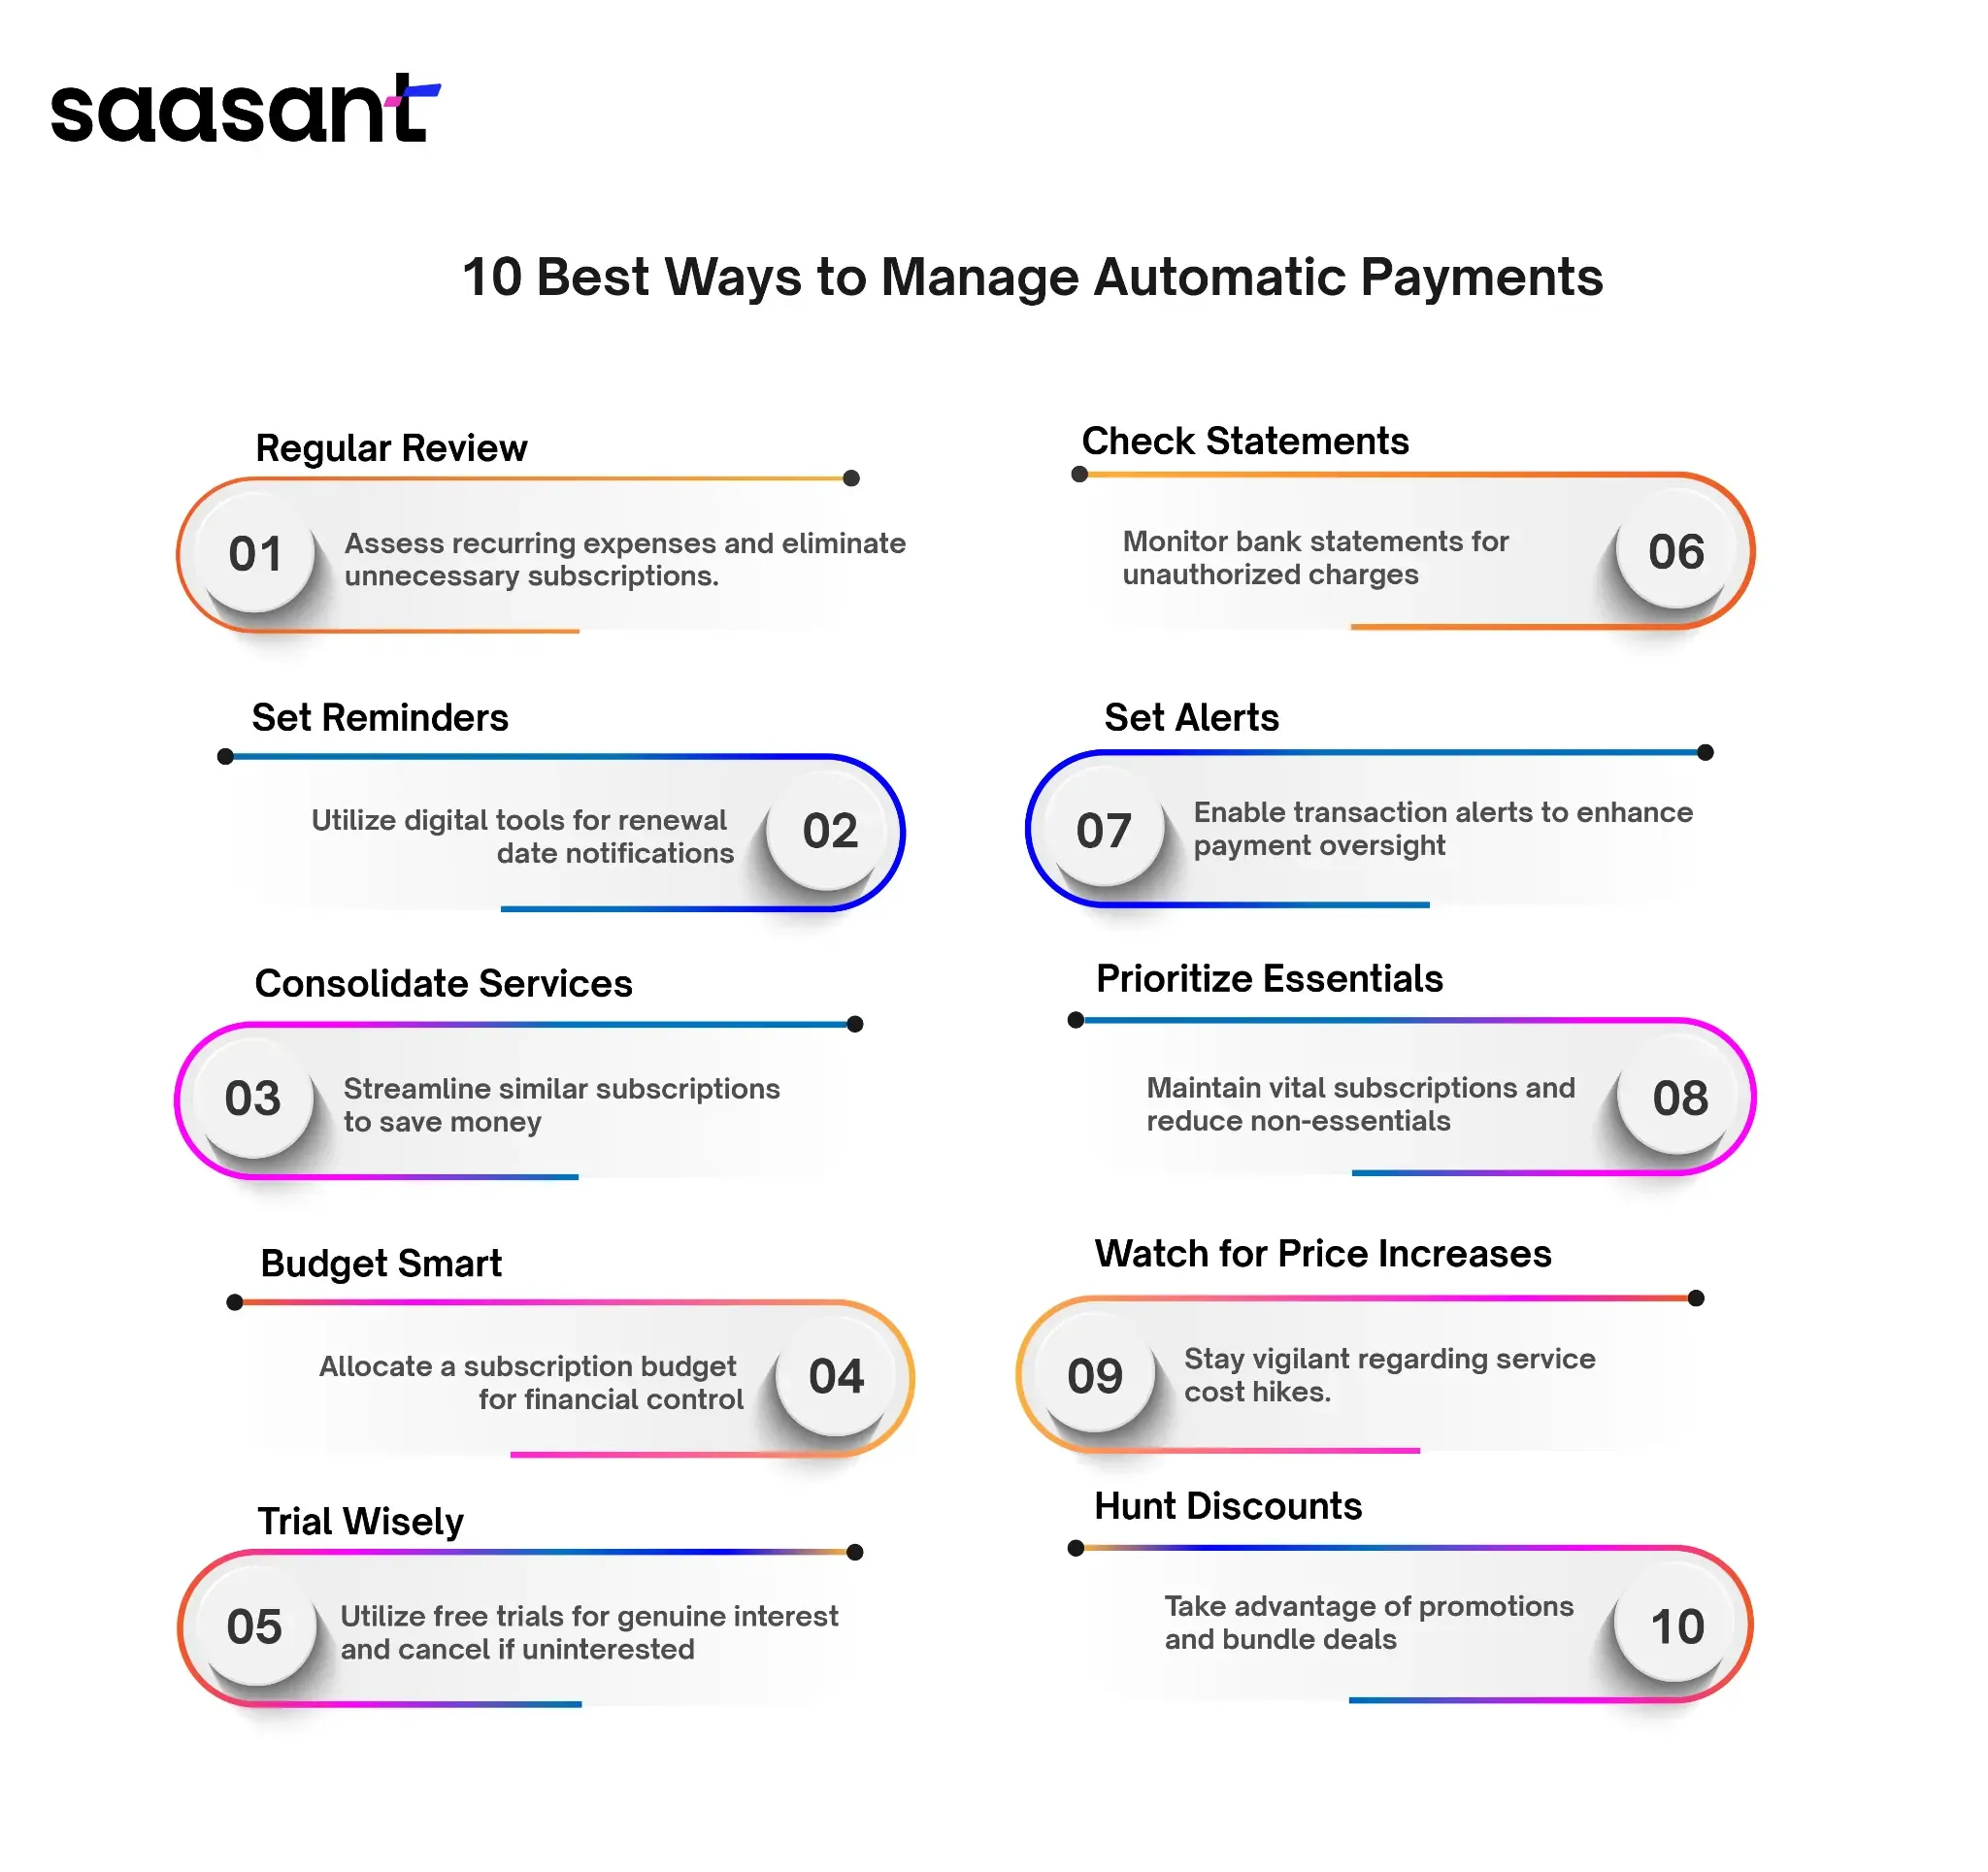 10 Best Ways to Manage Automatic Payments